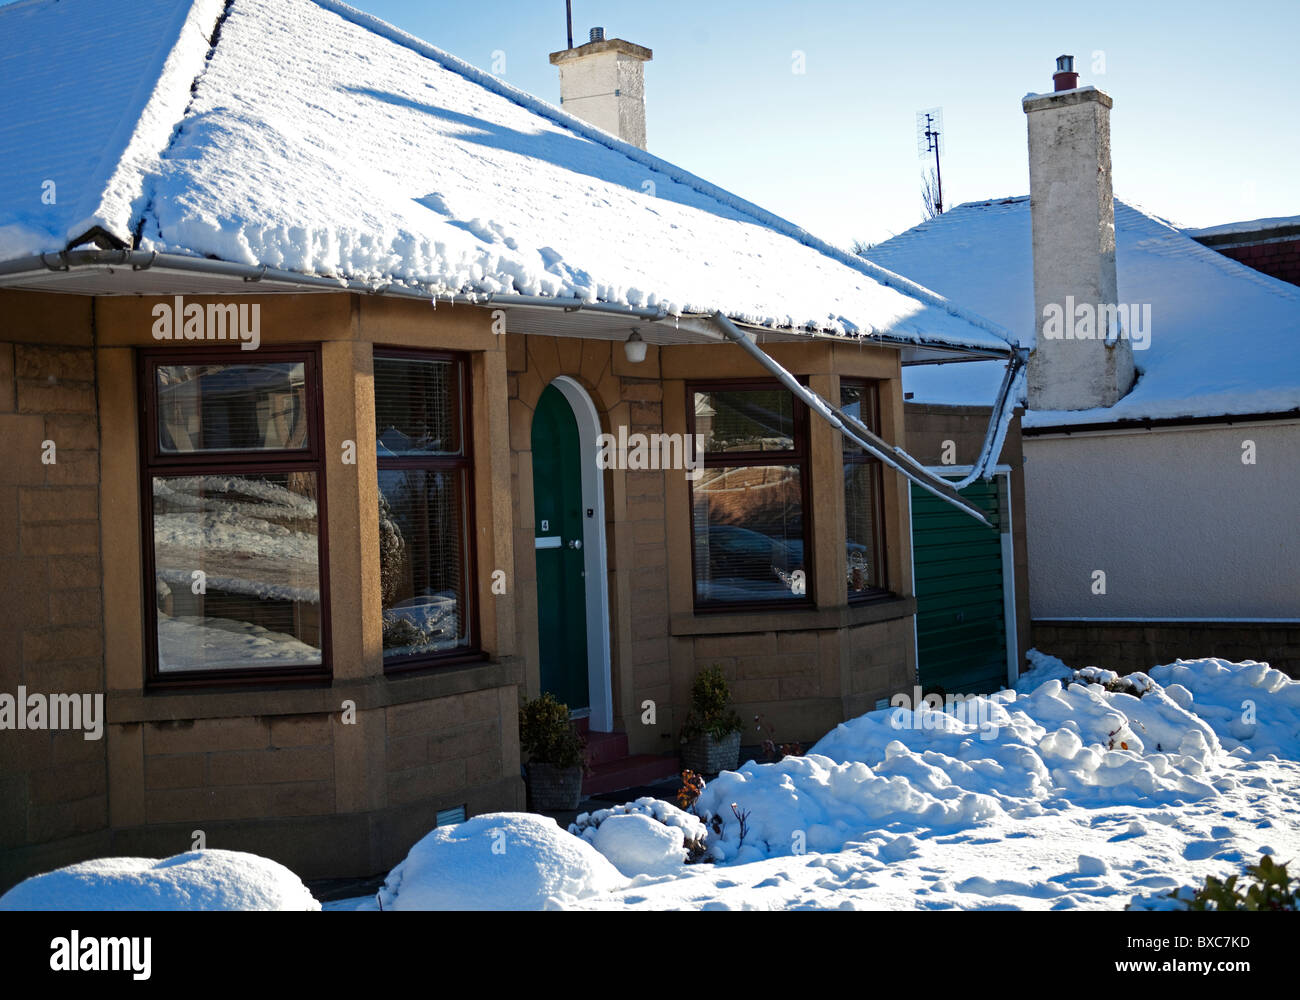 Winter Snow damage, collapsed roof guttering due to icy weather conditions Stock Photo